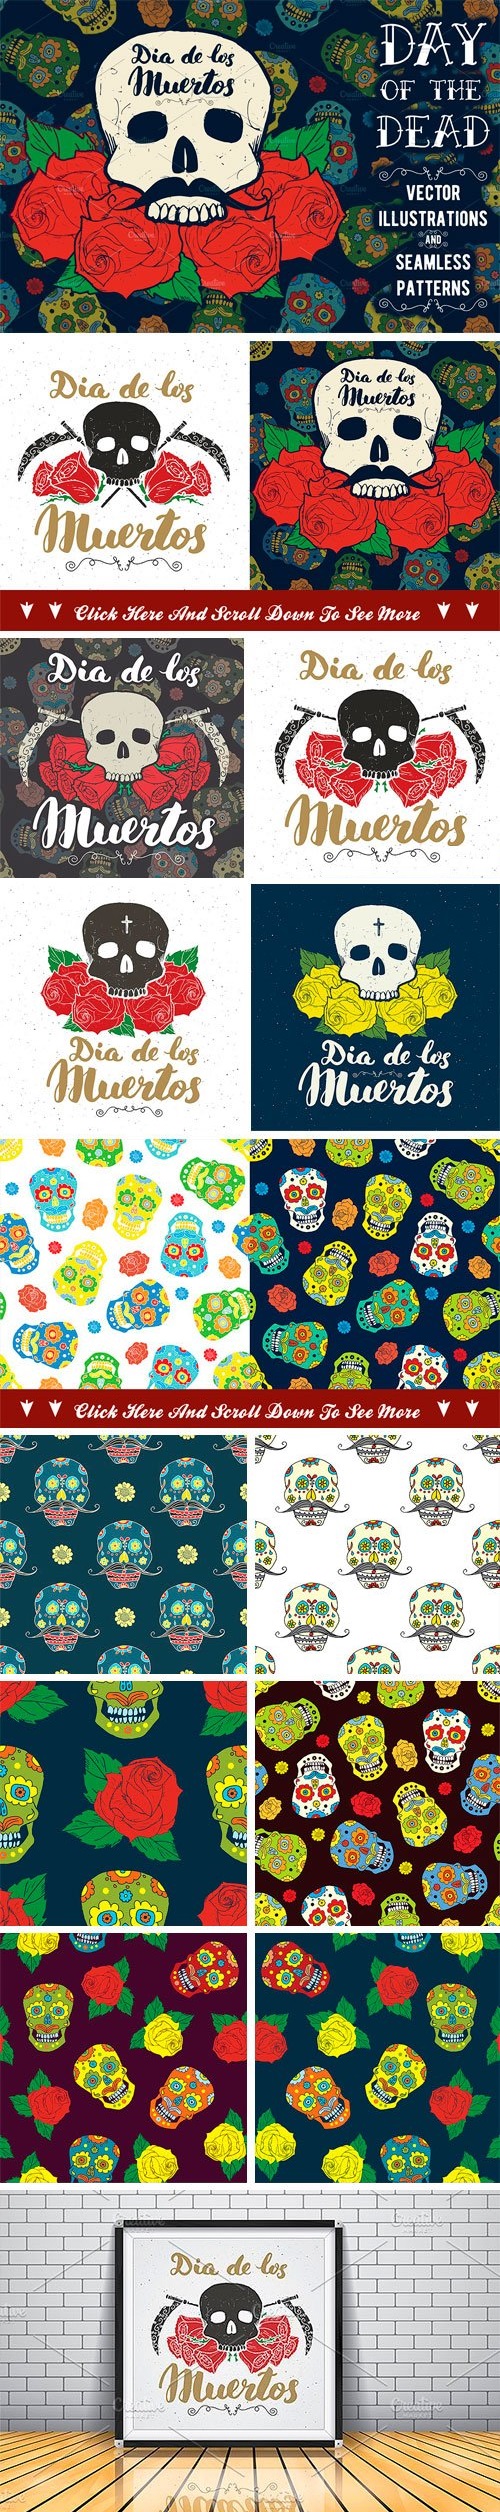 Day of the Dead, Cards and Patterns 1939019